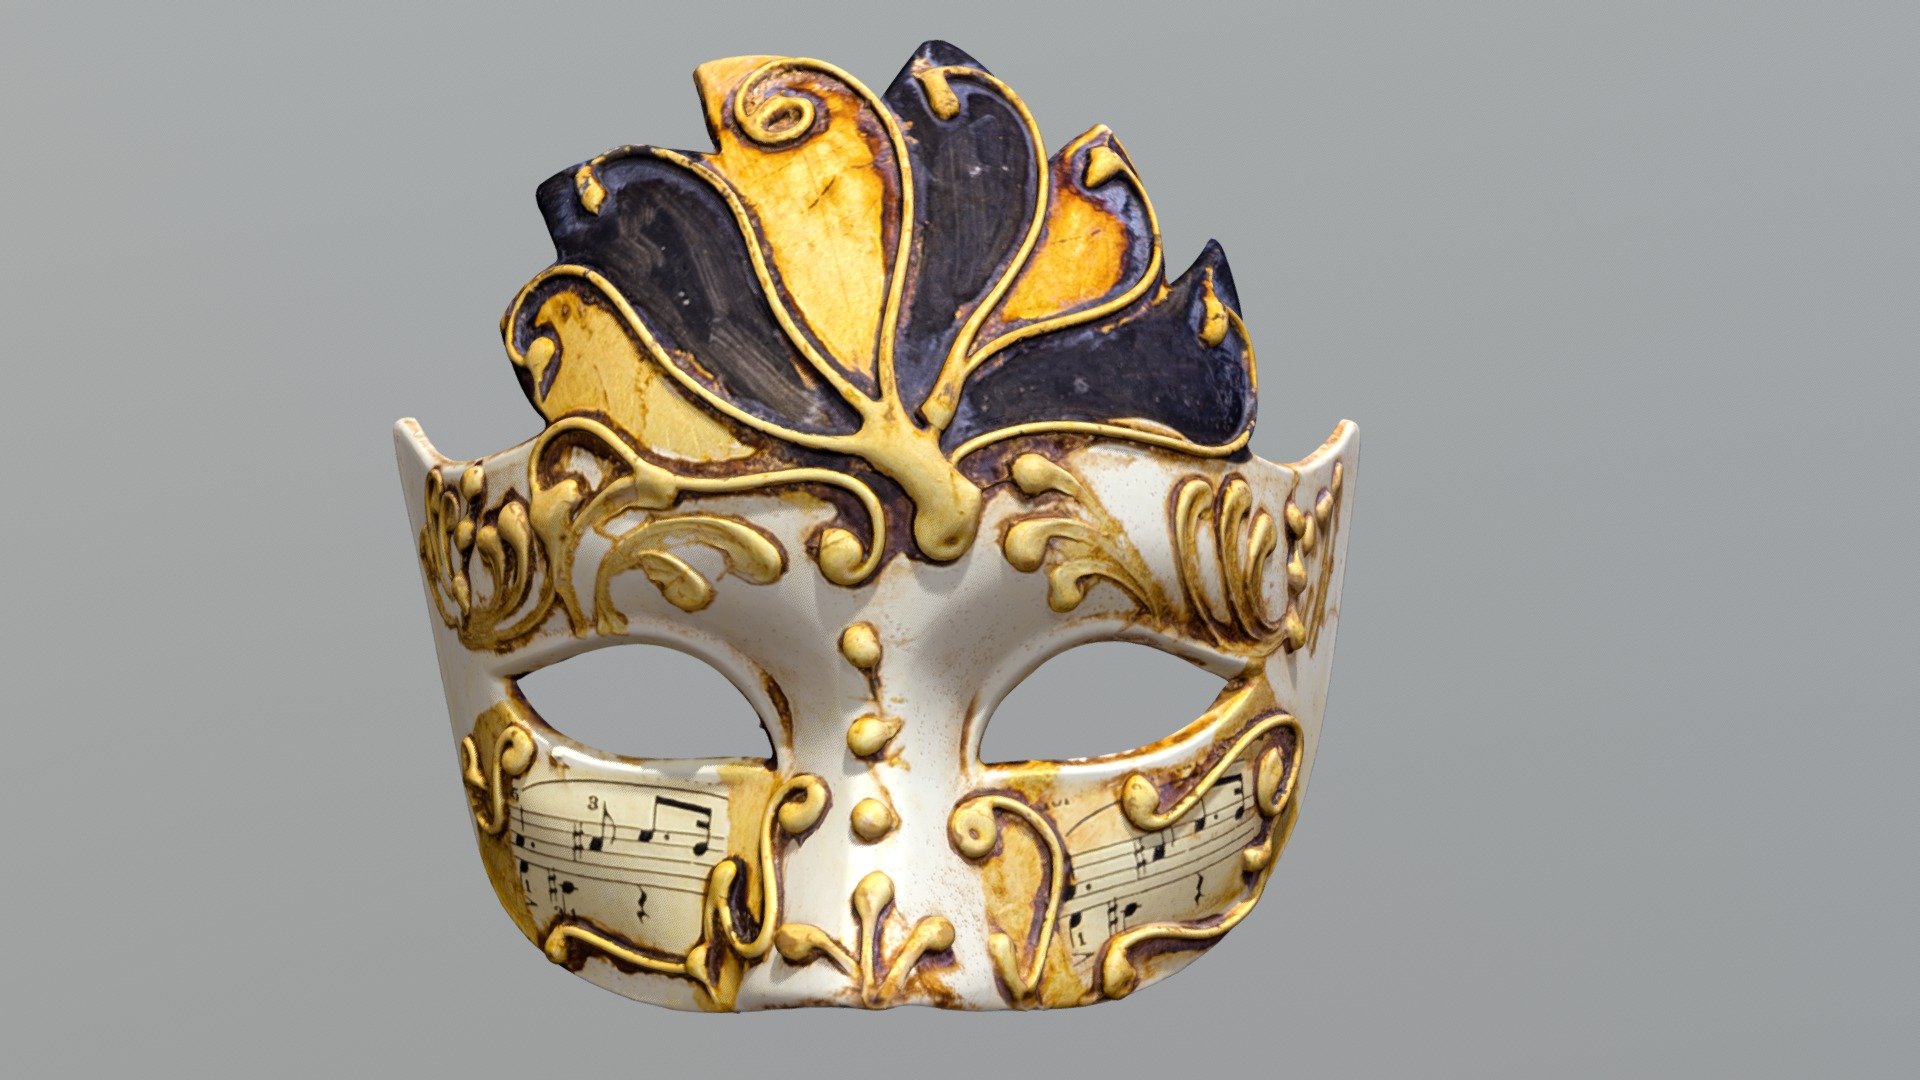 High detail 3D scan of a Venetian mask with color - Venetian Mask 2 - colored - Download Free 3D model by TetraVision 3d model